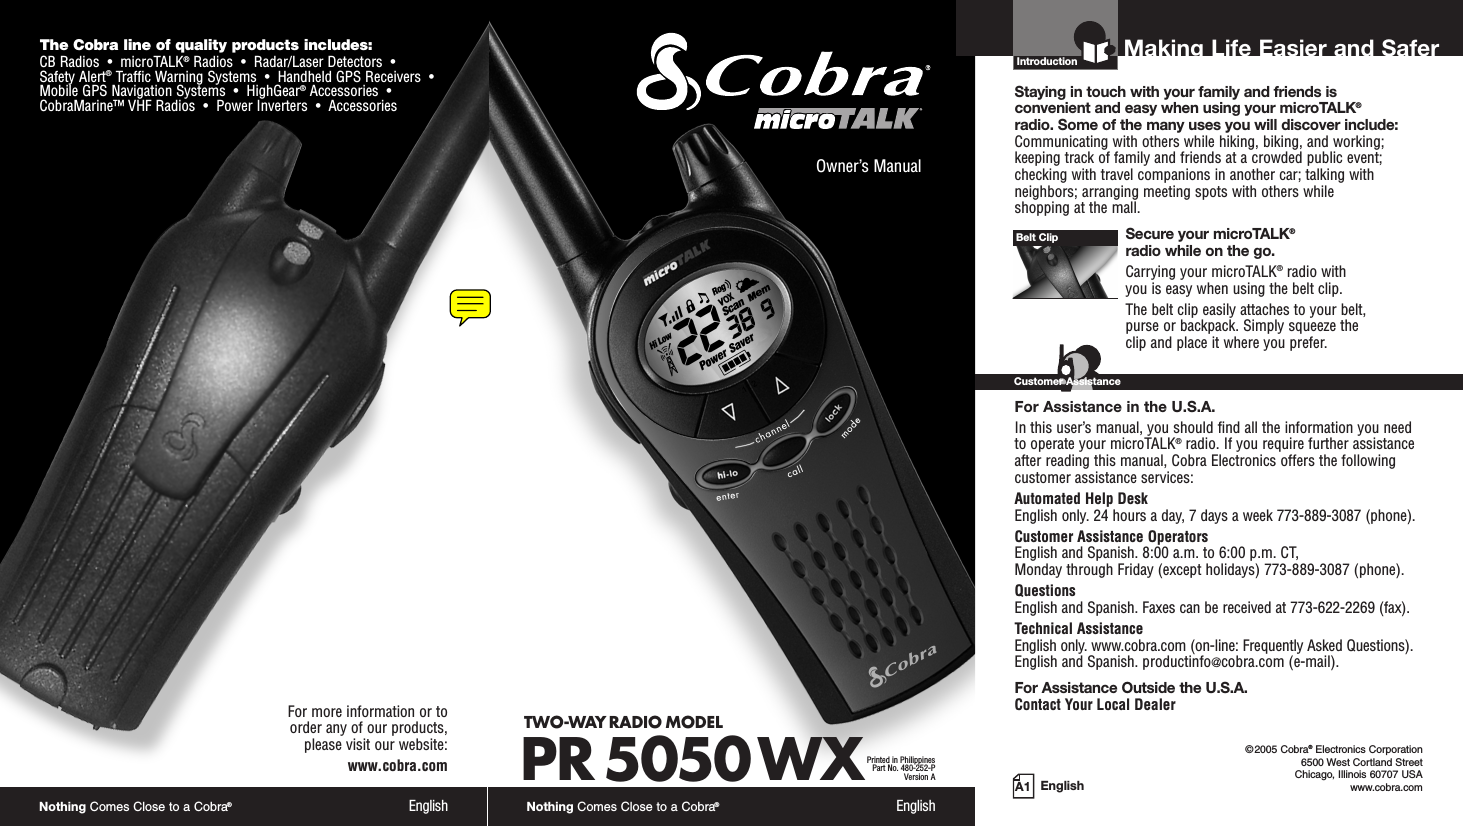 Nothing Comes Close to a Cobra®EnglishThe Cobra line of quality products includes:CB Radios  •  microTALK®Radios  •  Radar/Laser Detectors  •Safety Alert®Traffic Warning Systems  •  Handheld GPS Receivers  •Mobile GPS Navigation Systems  •  HighGear®Accessories  •CobraMarine™ VHF Radios  •  Power Inverters  •  AccessoriesFor more information or to order any of our products, please visit our website:www.cobra.comA1 EnglishMaking Life Easier and SaferOwner’s ManualNothing Comes Close to a Cobra®EnglishIntroductionStaying in touch with your family and friends is convenient and easy when using your microTALK®radio. Some of the many uses you will discover include:Communicating with others while hiking, biking, and working;keeping track of family and friends at a crowded public event;checking with travel companions in another car; talking withneighbors; arranging meeting spots with others while shopping at the mall.Secure your microTALK®radio while on the go.Carrying your microTALK®radio with you is easy when using the belt clip. The belt clip easily attaches to your belt, purse or backpack. Simply squeeze the clip and place it where you prefer.For Assistance in the U.S.A. In this user’s manual, you should find all the information you needto operate your microTALK®radio. If you require further assistanceafter reading this manual, Cobra Electronics offers the followingcustomer assistance services:Automated Help Desk English only. 24 hours a day, 7 days a week 773-889-3087 (phone). Customer Assistance OperatorsEnglish and Spanish. 8:00 a.m. to 6:00 p.m. CT, Monday through Friday (except holidays) 773-889-3087 (phone). QuestionsEnglish and Spanish. Faxes can be received at 773-622-2269 (fax). Technical AssistanceEnglish only. www.cobra.com (on-line: Frequently Asked Questions). English and Spanish. productinfo@cobra.com (e-mail).For Assistance Outside the U.S.A. Contact Your Local DealerBelt ClipCustomer Assistance©2005 Cobra®Electronics Corporation6500 West Cortland StreetChicago, Illinois 60707 USAwww.cobra.comTWO-WAY RADIO MODEL PR 5050 WXPrinted in PhilippinesPart No. 480-252-PVersion A